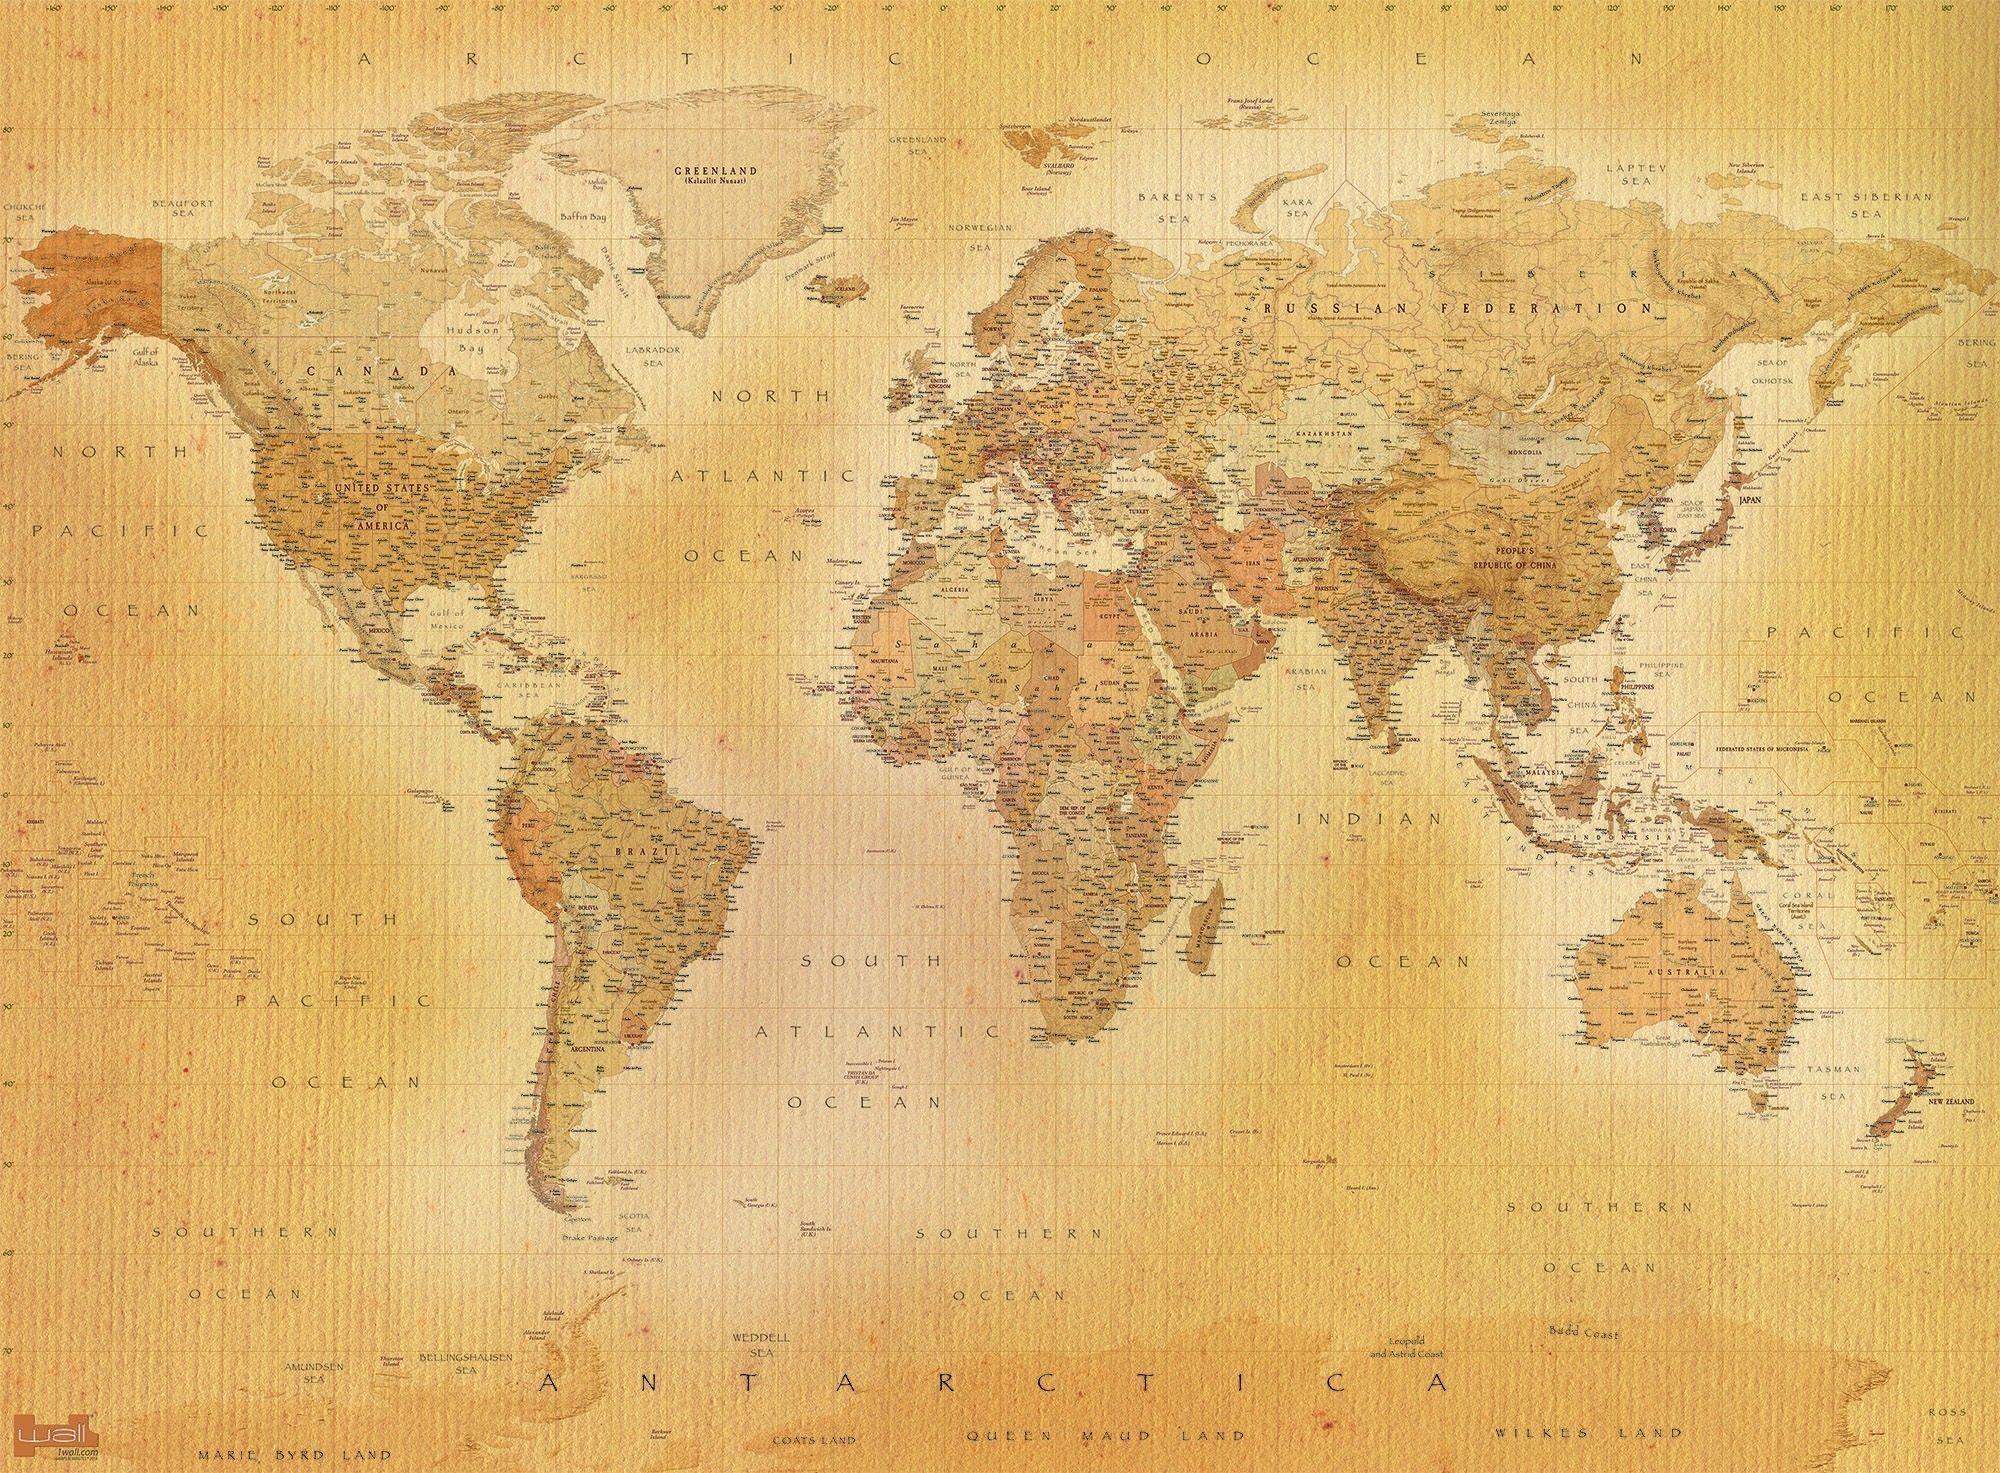 Antique World Map Wallpapers - Top Free Antique World Map Backgrounds